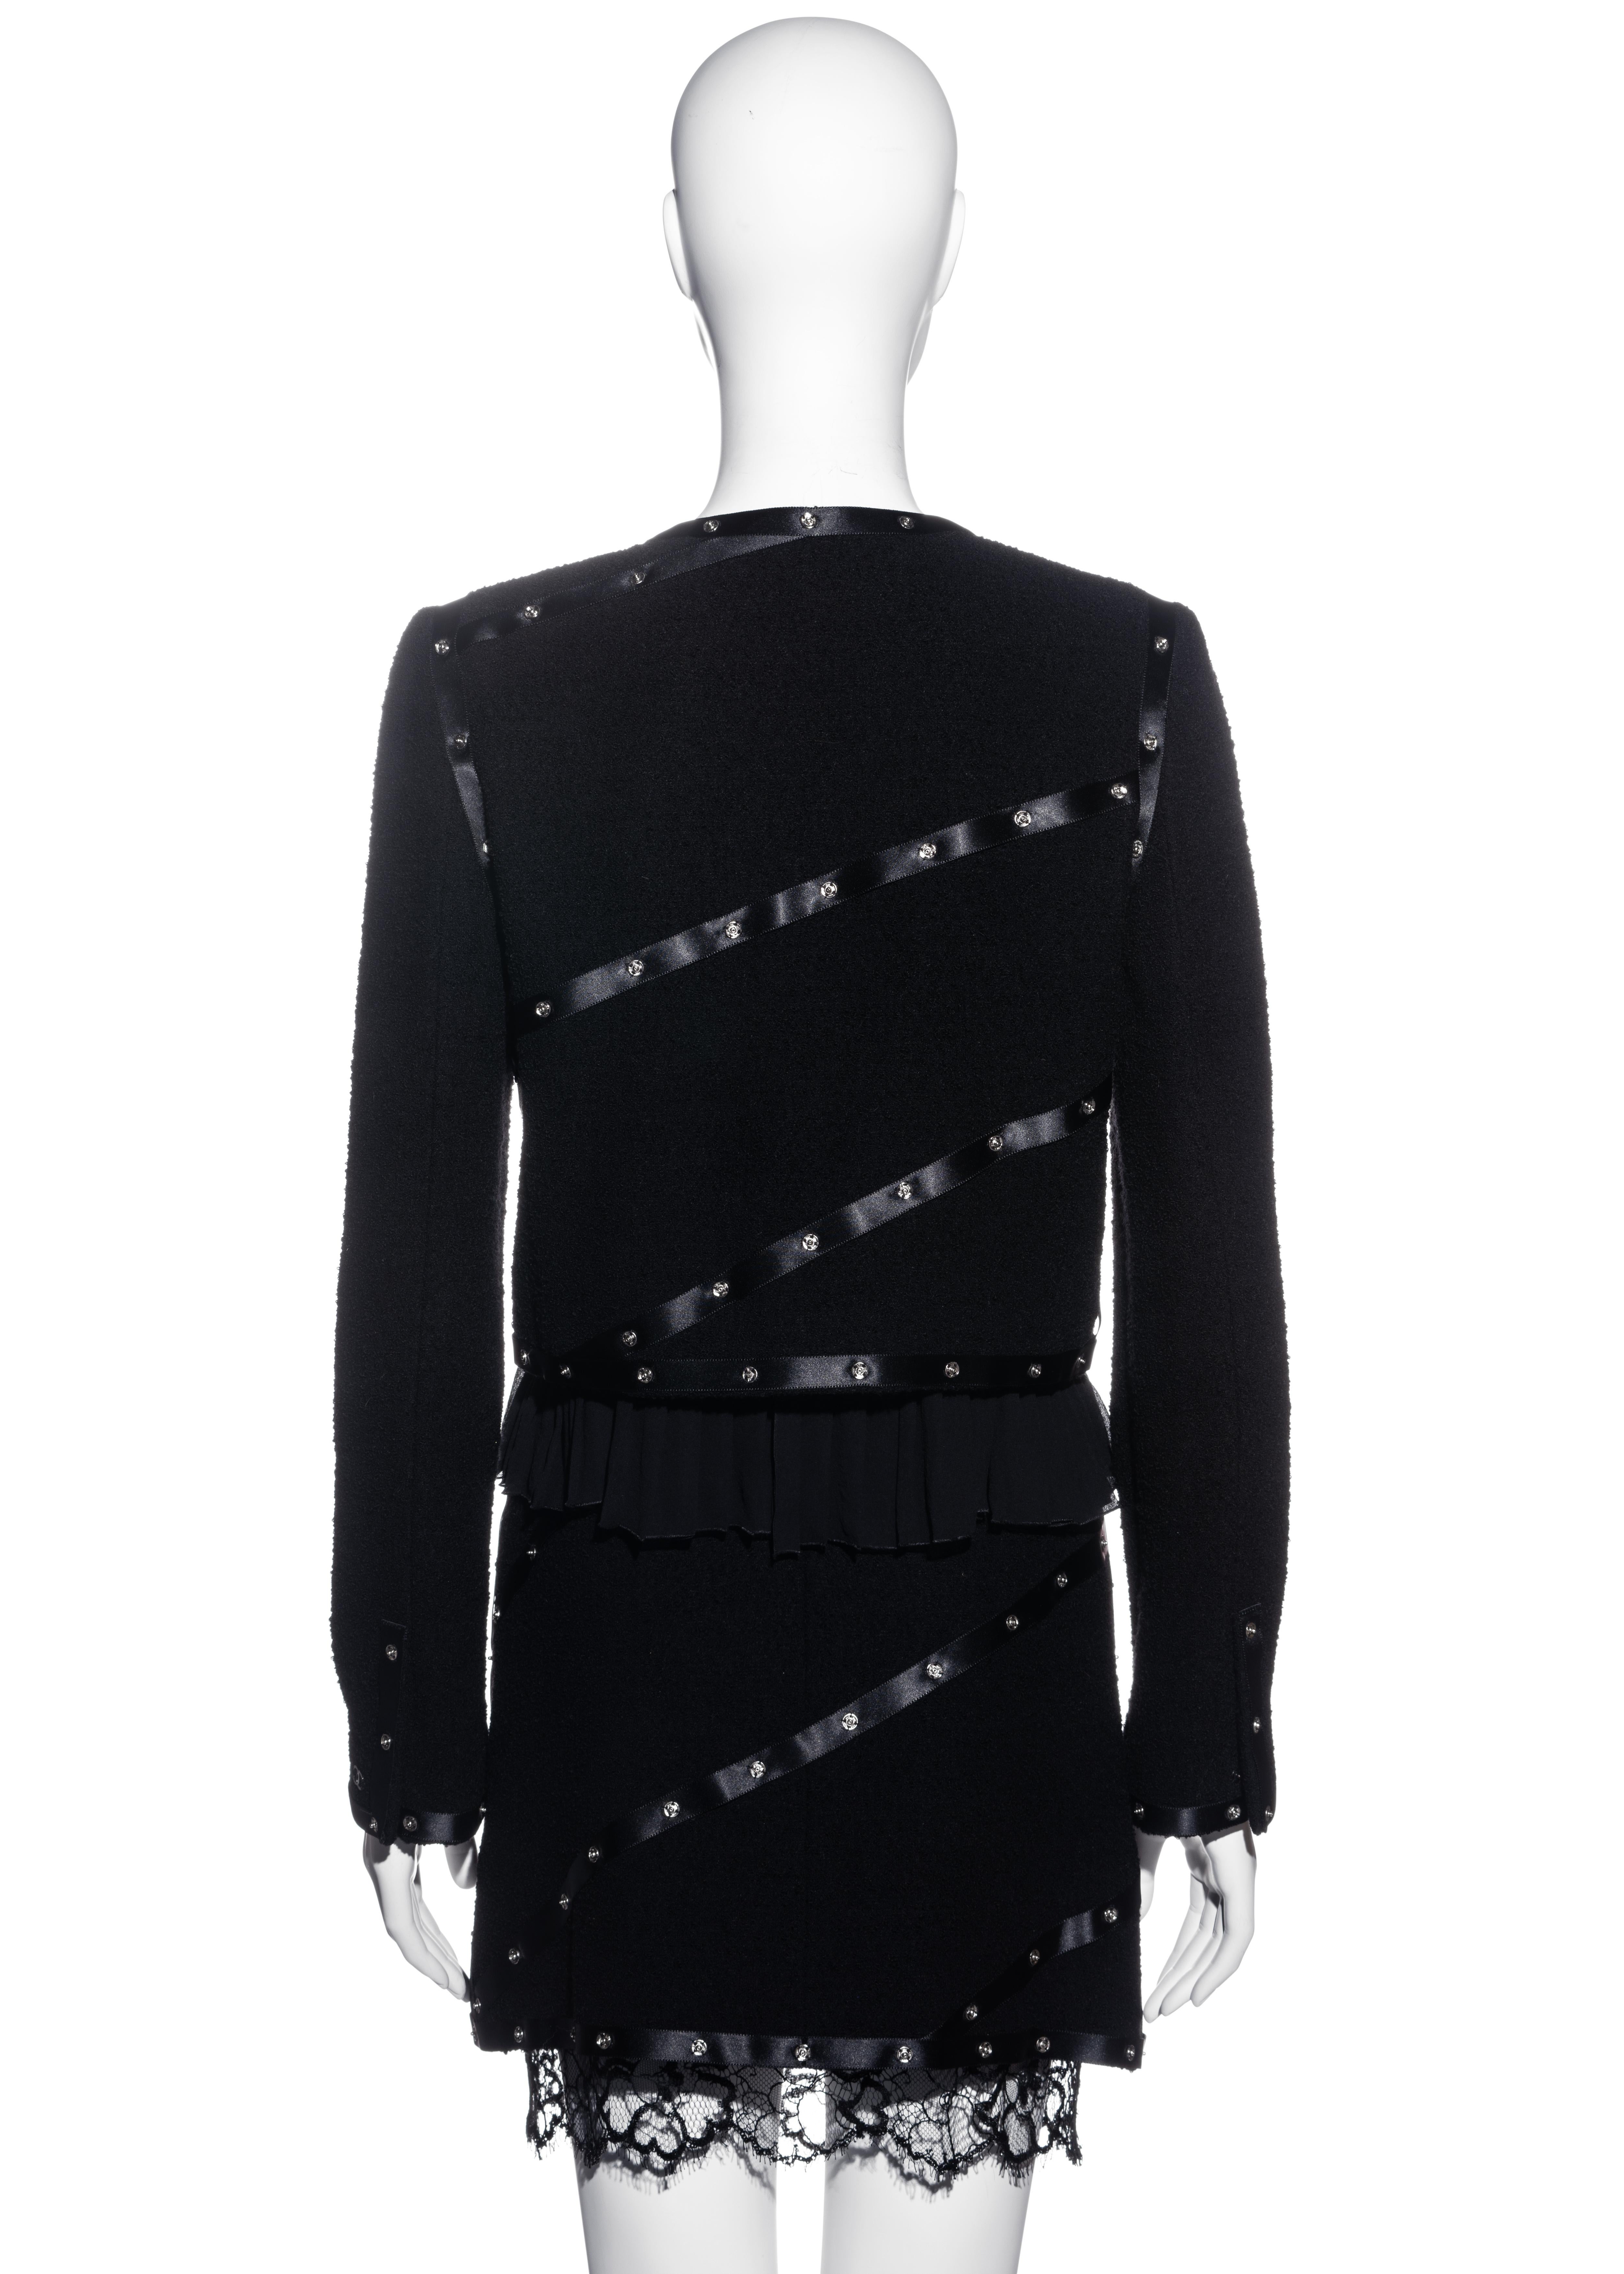 Chanel by Karl Lagerfeld black wool, silk and lace skirt suit, fw 2003 2